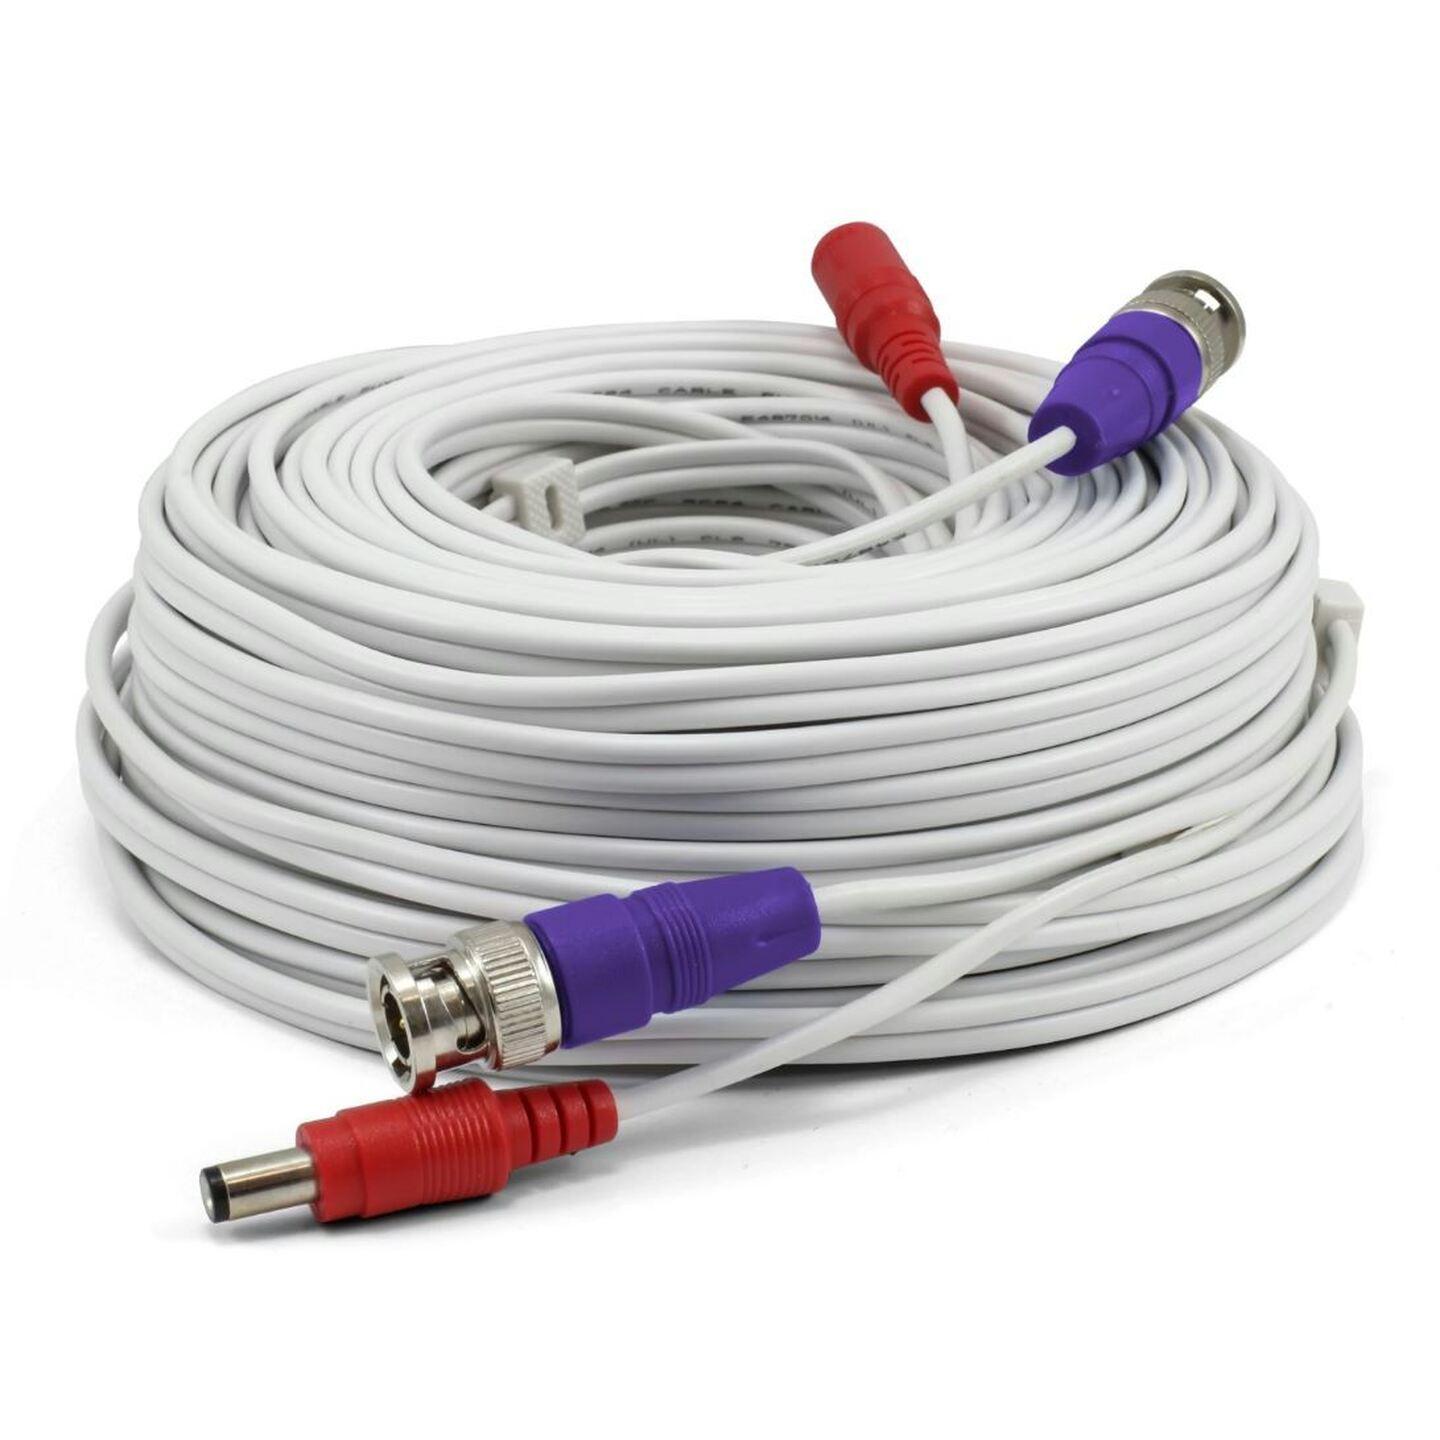 Swann Video and Power 30m Extension Cable